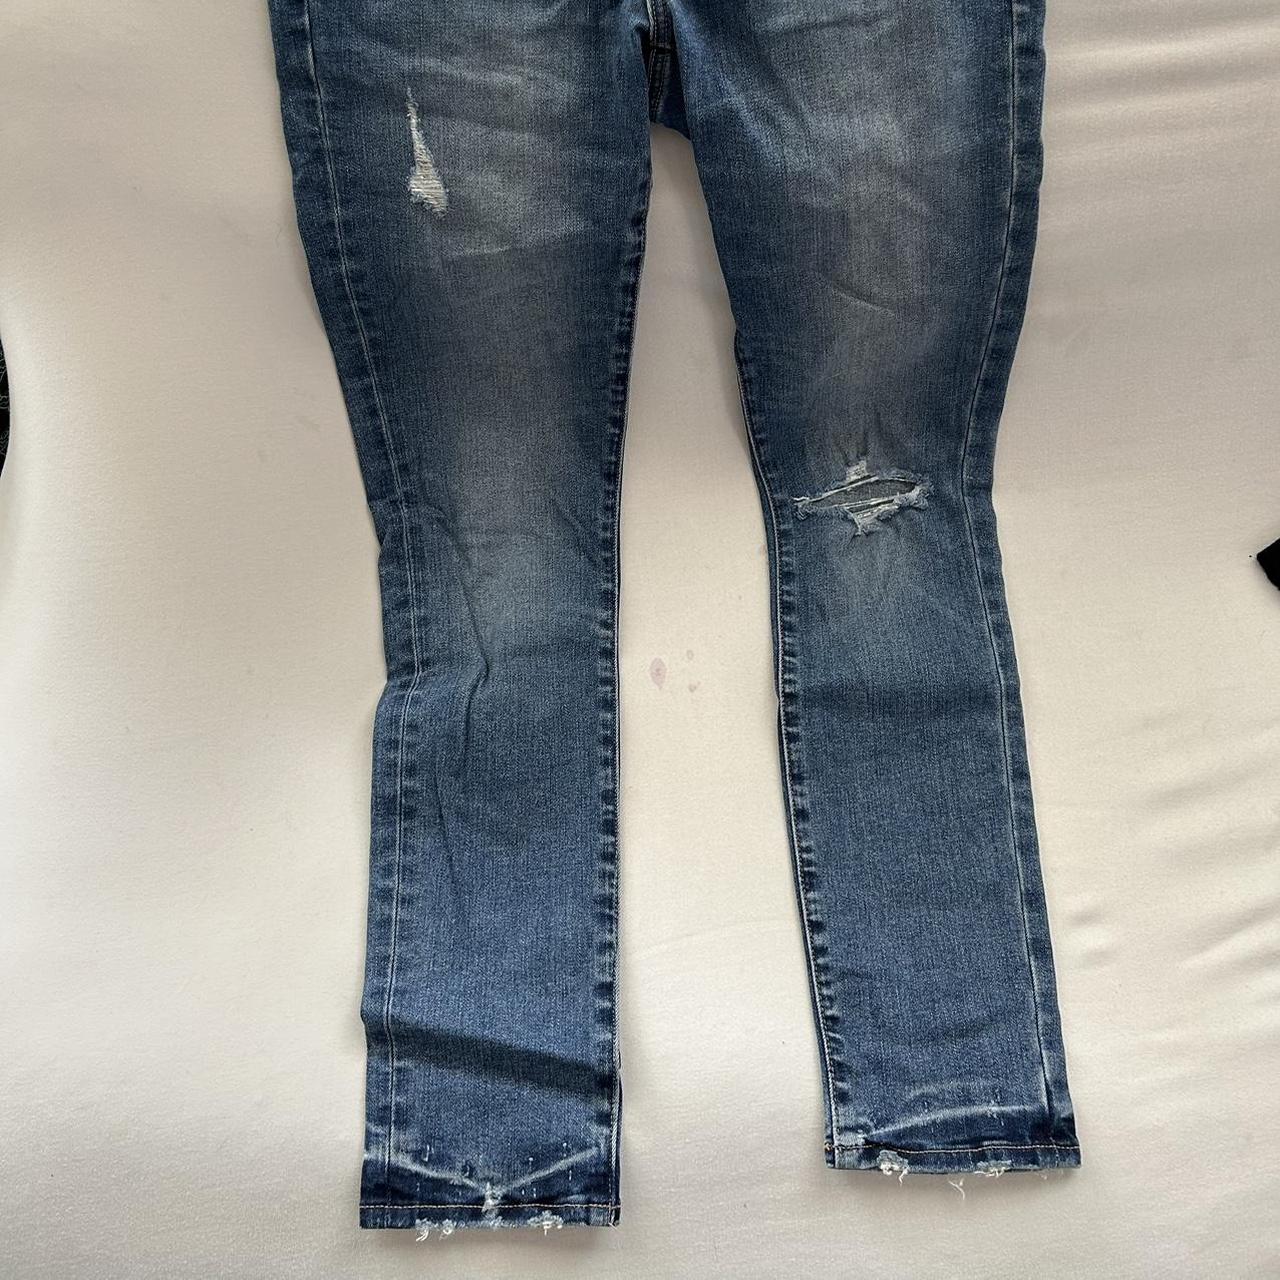 LUCKY BRAND skinny jeans MADE IN THE USA 🇺🇸 - Depop